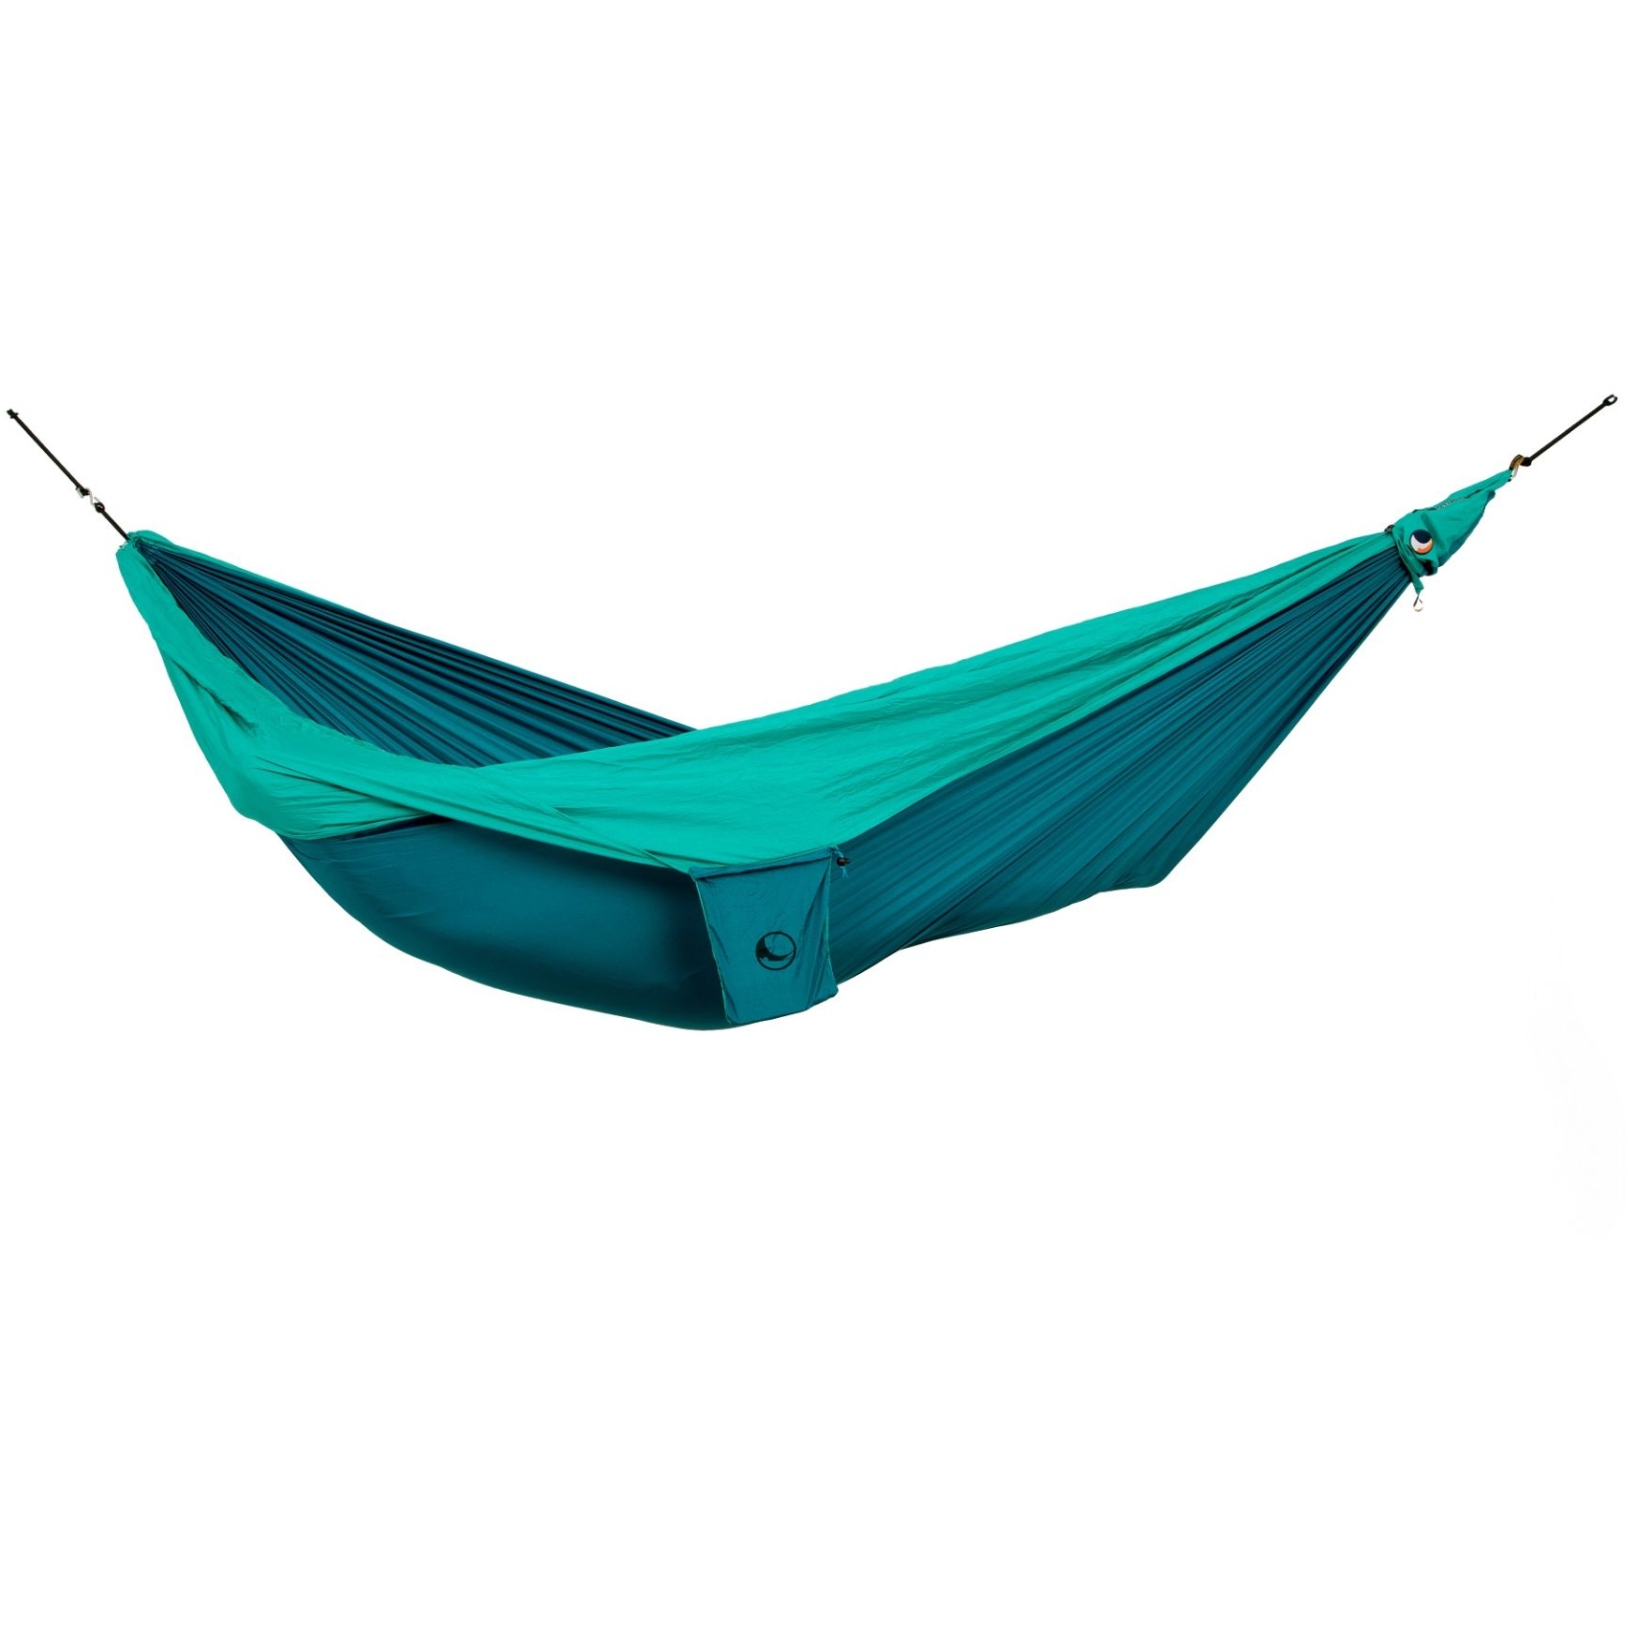 Picture of Ticket To The Moon Travel King Size Hammock - Emerald Green / Green